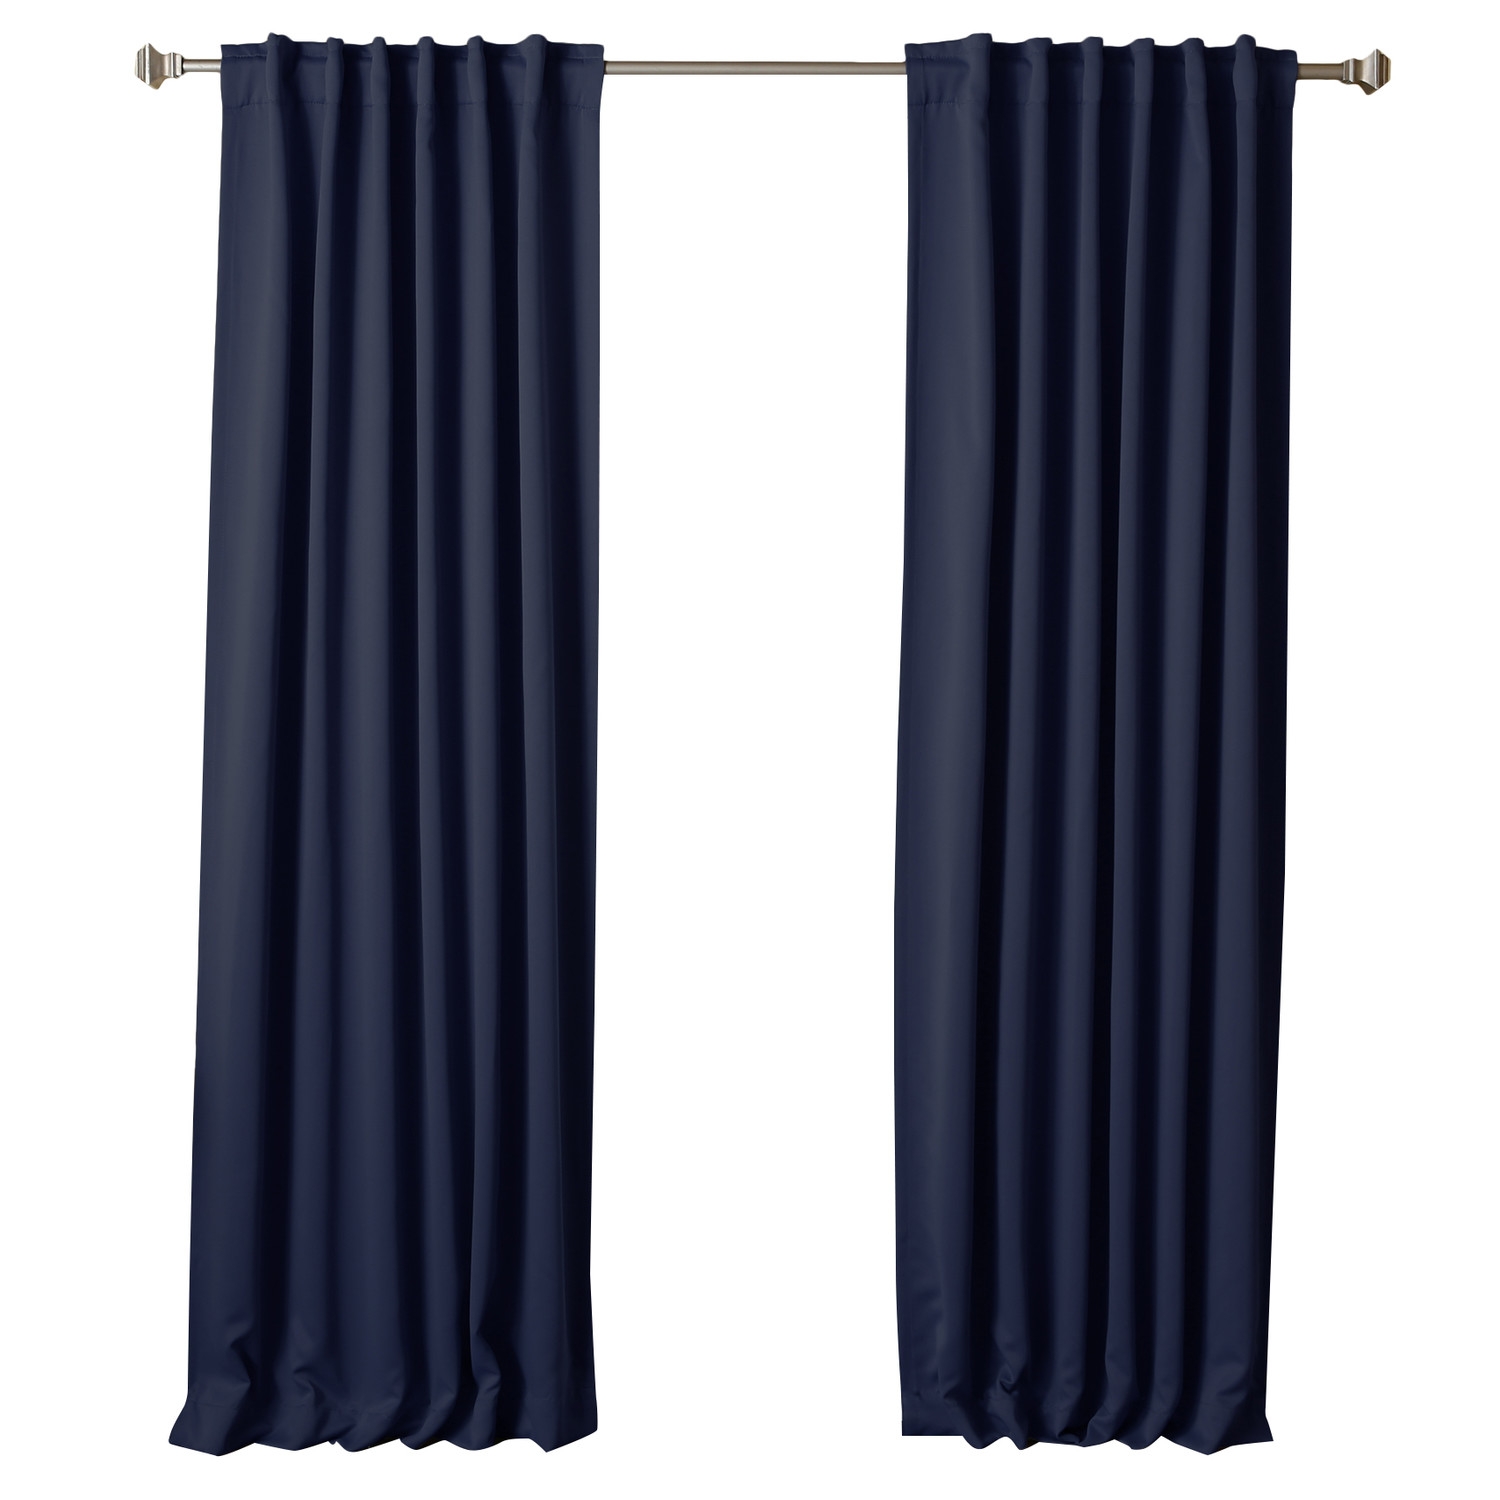 Thermal Insulated Blackout Curtain Panel - Image 0